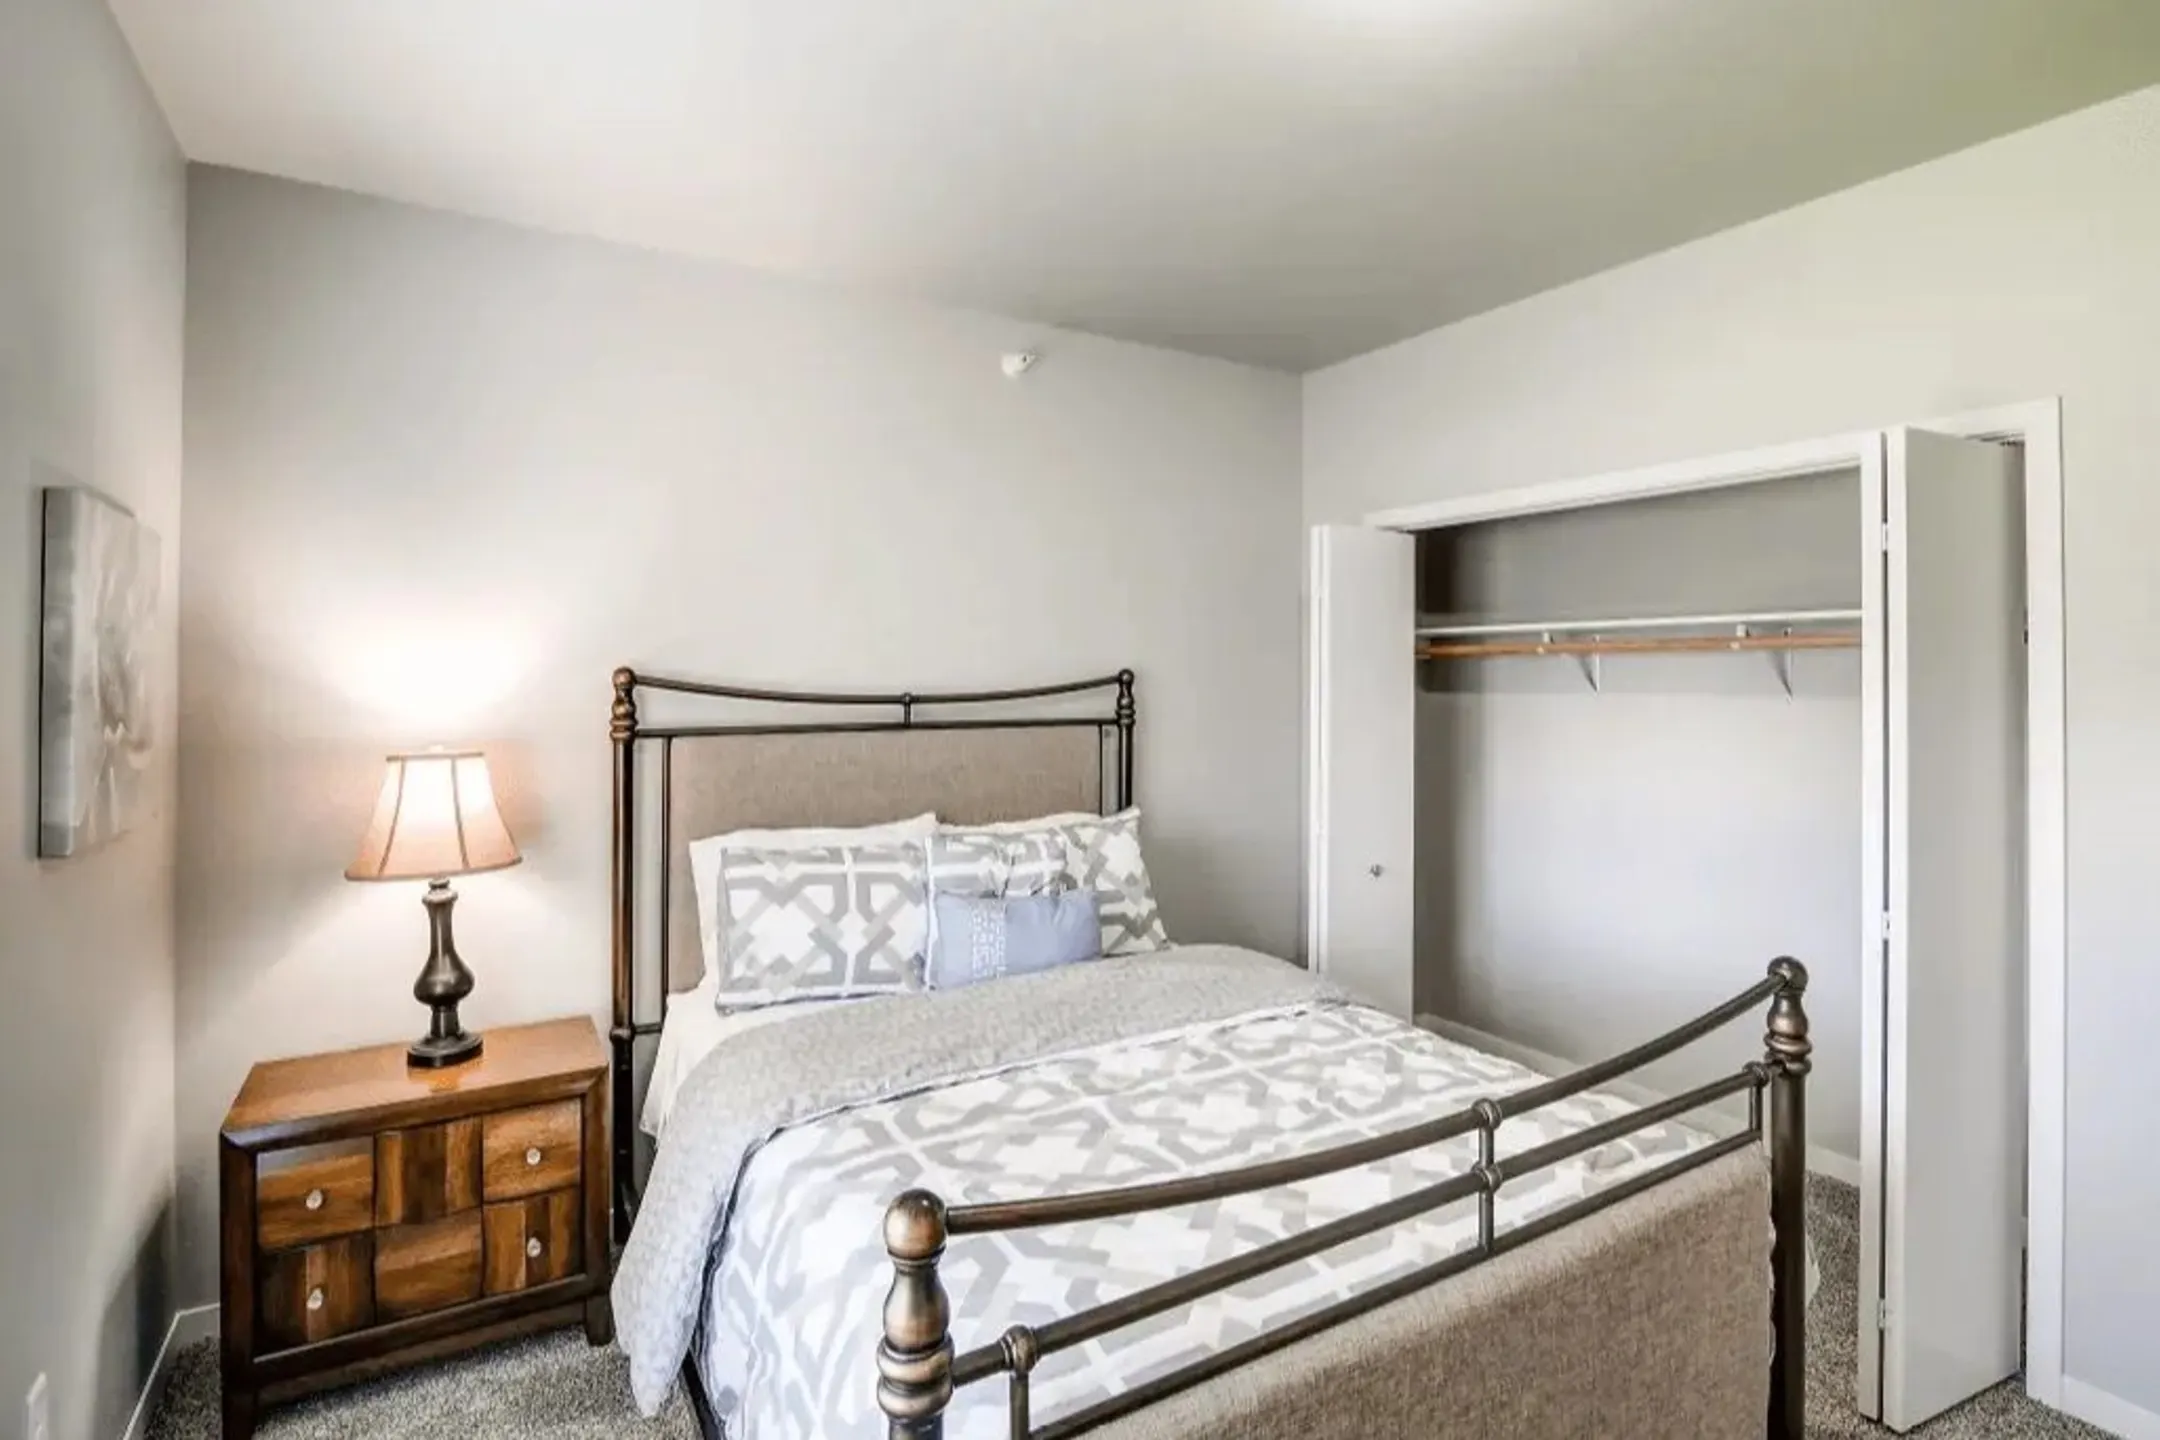 Bedroom - North Highlands Luxury Apartments - Minot, ND